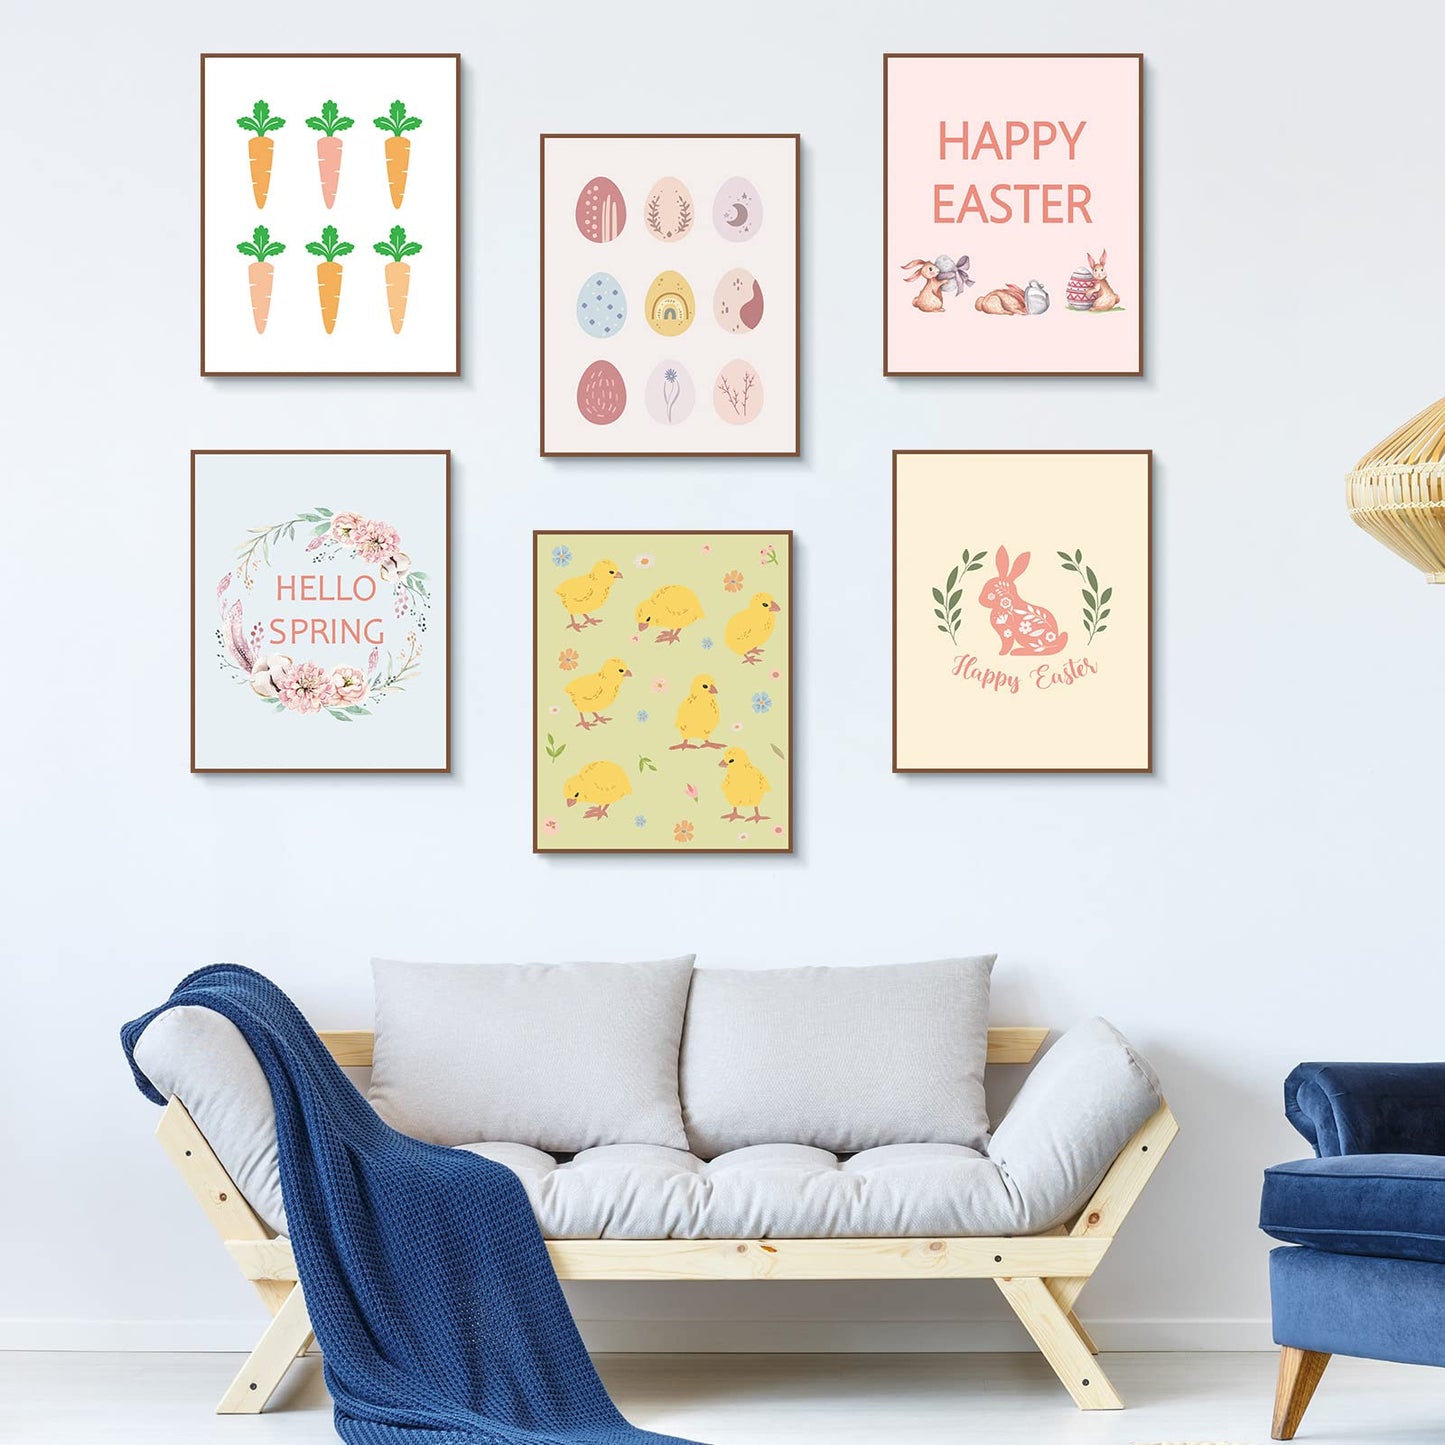 6 Pcs Easter Boho Wall Art Bunny Wall Decor 8 x 10 In Canvas Pastel Aesthetic Wall Decor Unframed Bedroom Decor Pictures for Wall Holiday Poster Prints for Living Room (carrot)